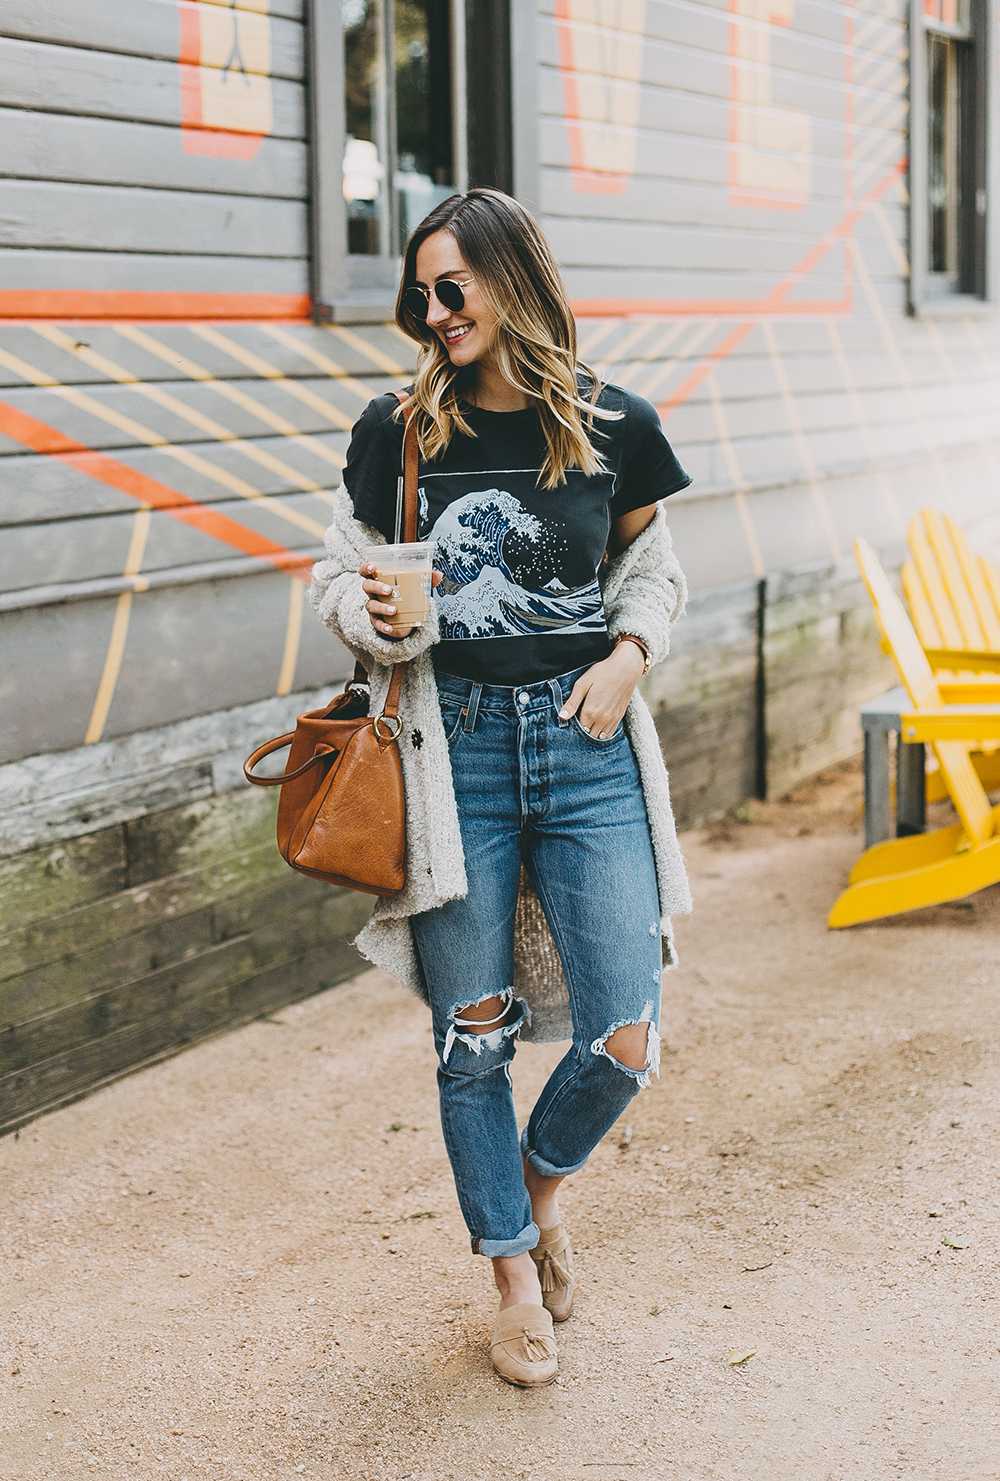 15 style California outfit ideas